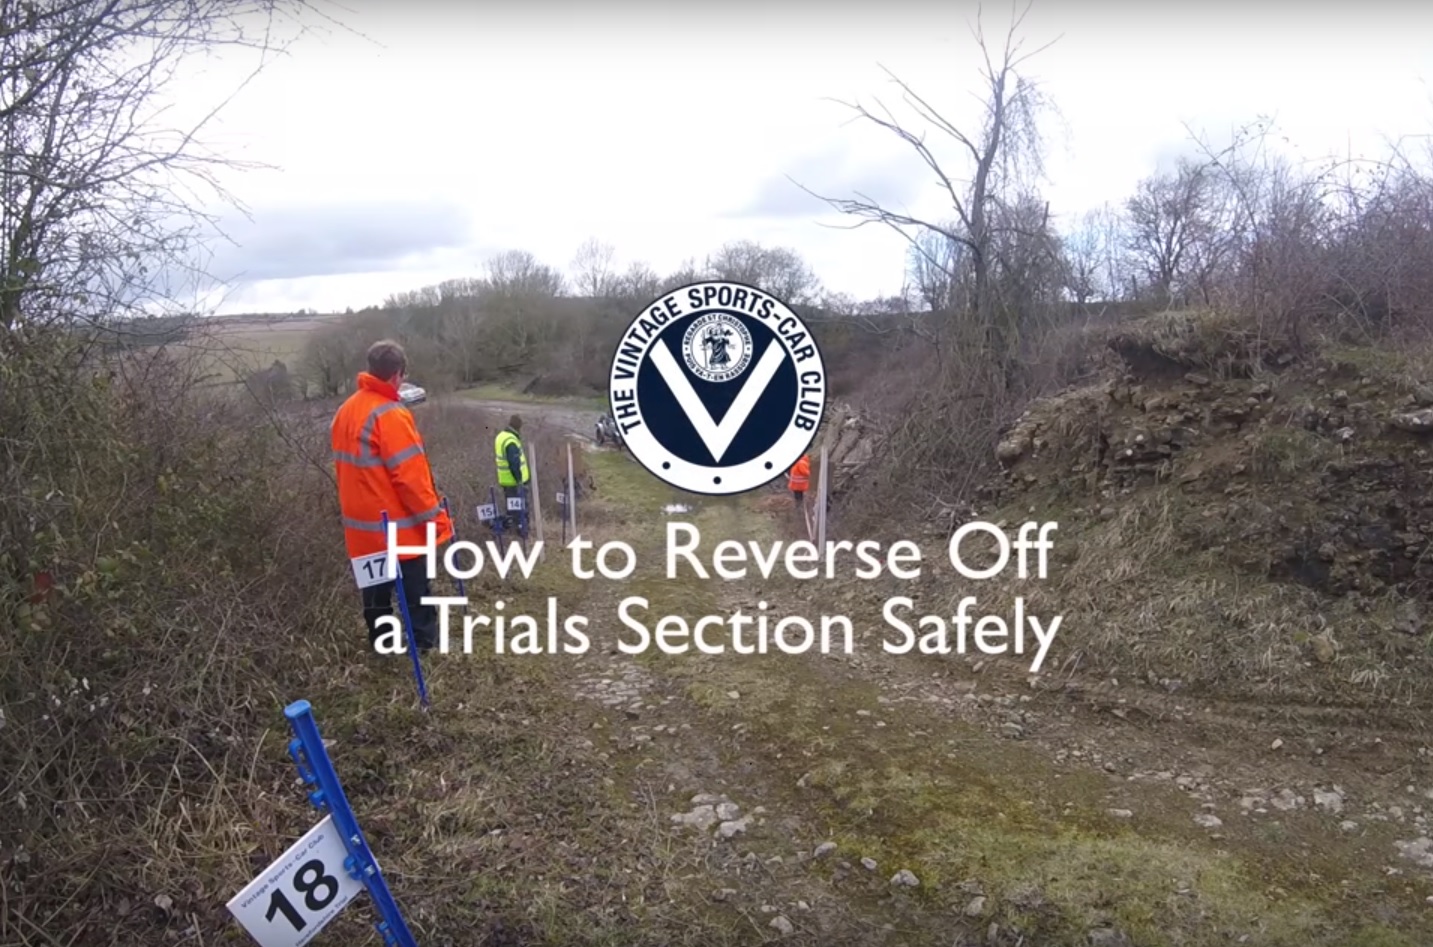 New Safety Videos Released Ahead of Trials Season cover